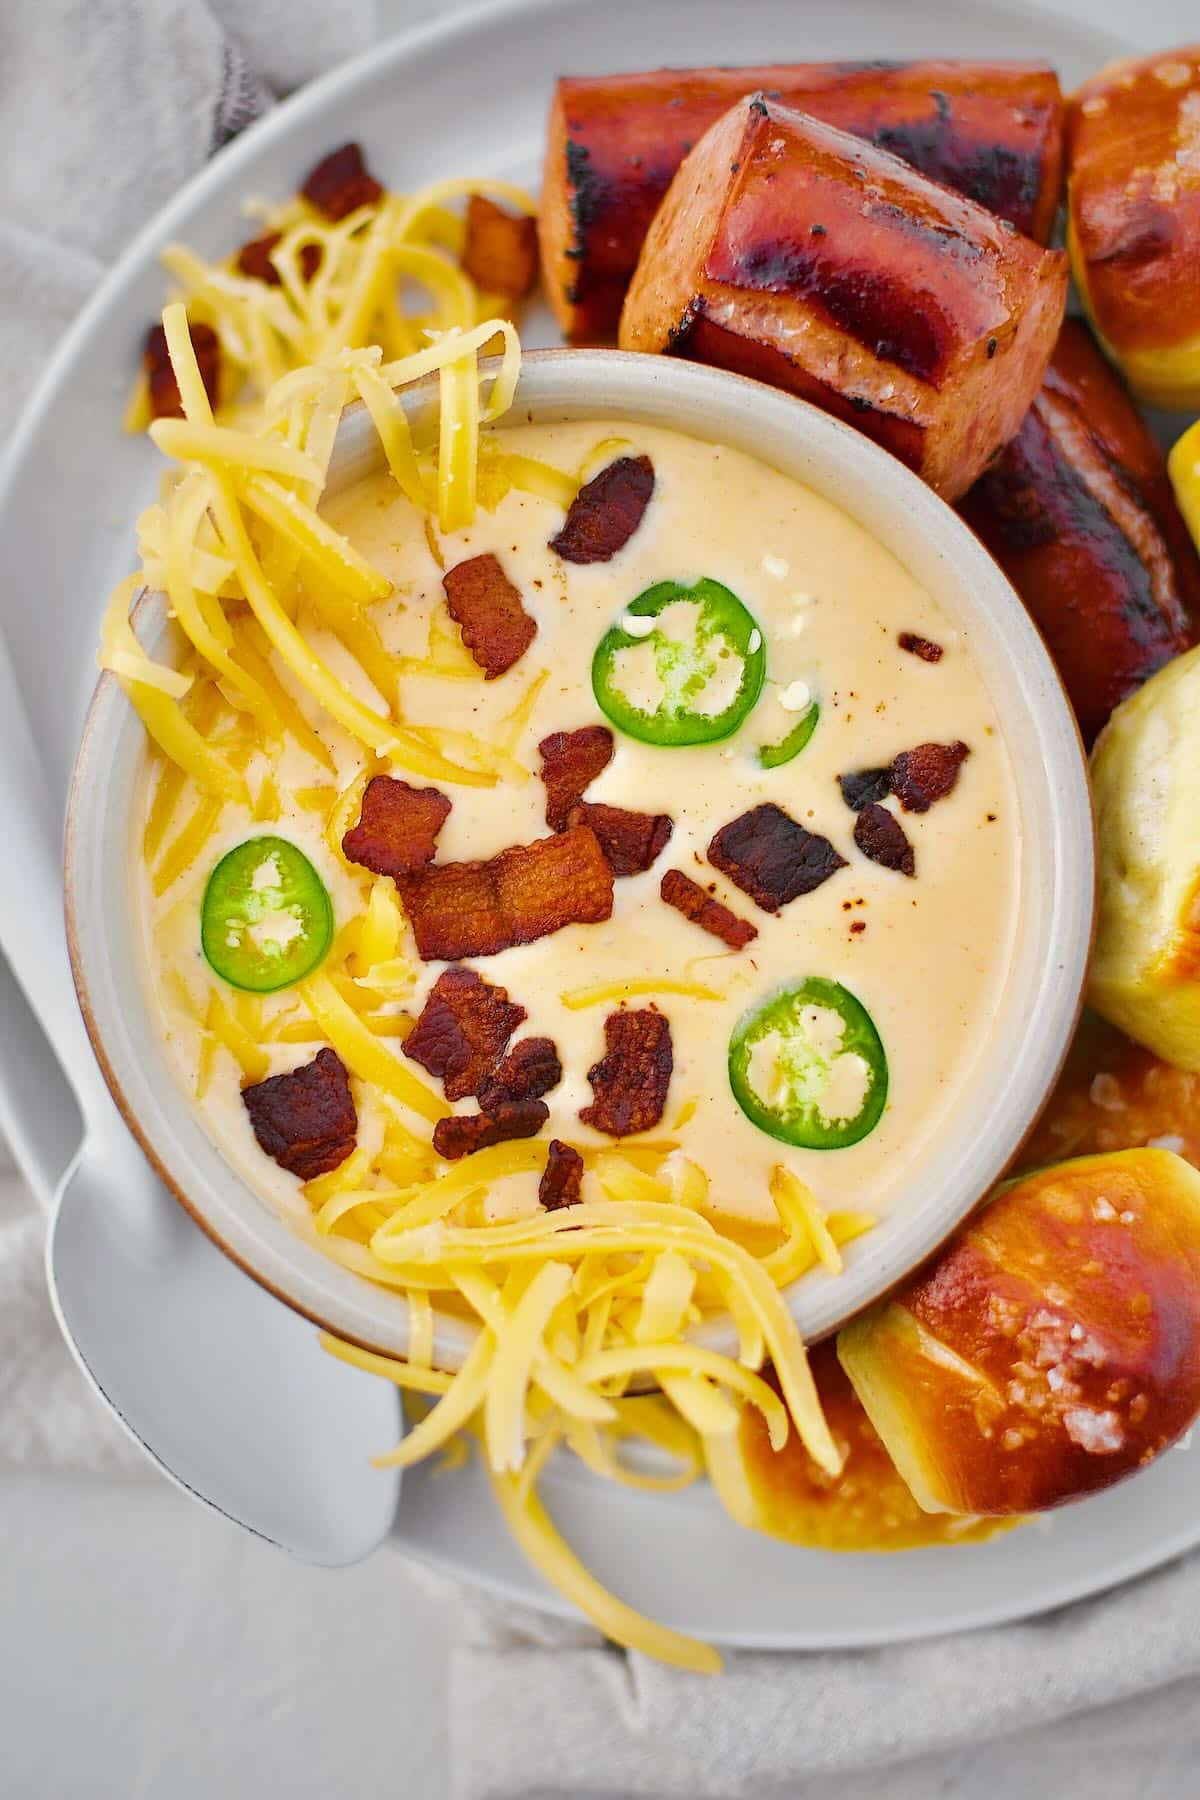 Beer Cheese Soup topped with more cheese, bacon bits, and serrano chili slices, ready to eat. Served with Kielbasa and Pretzel Bites